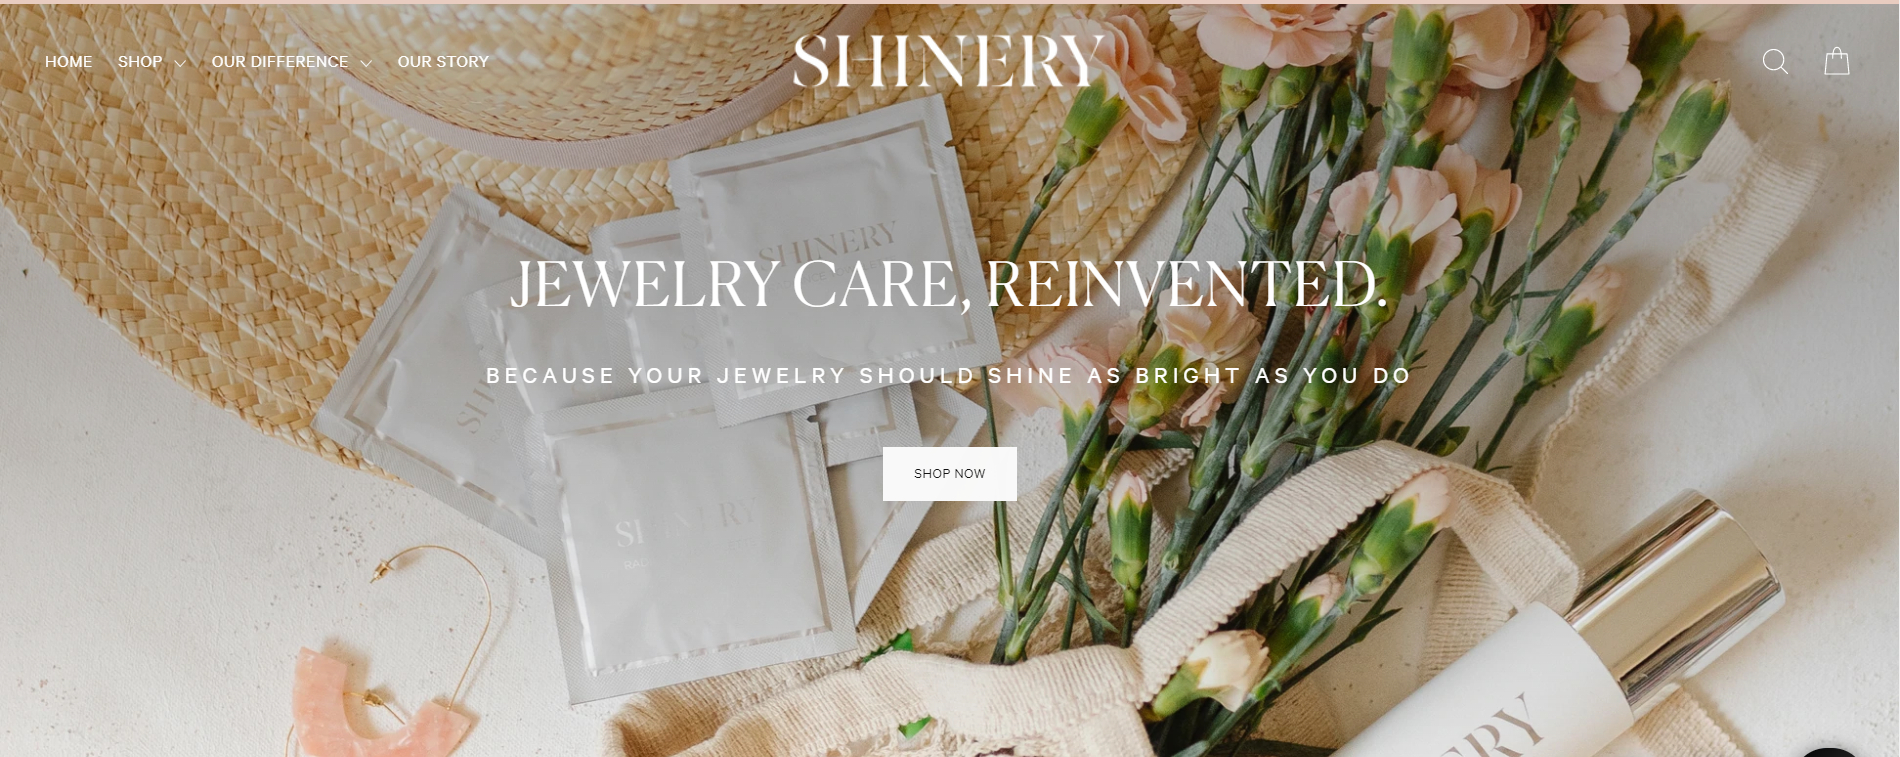 Shinery Jewelry Cleaner Reviews